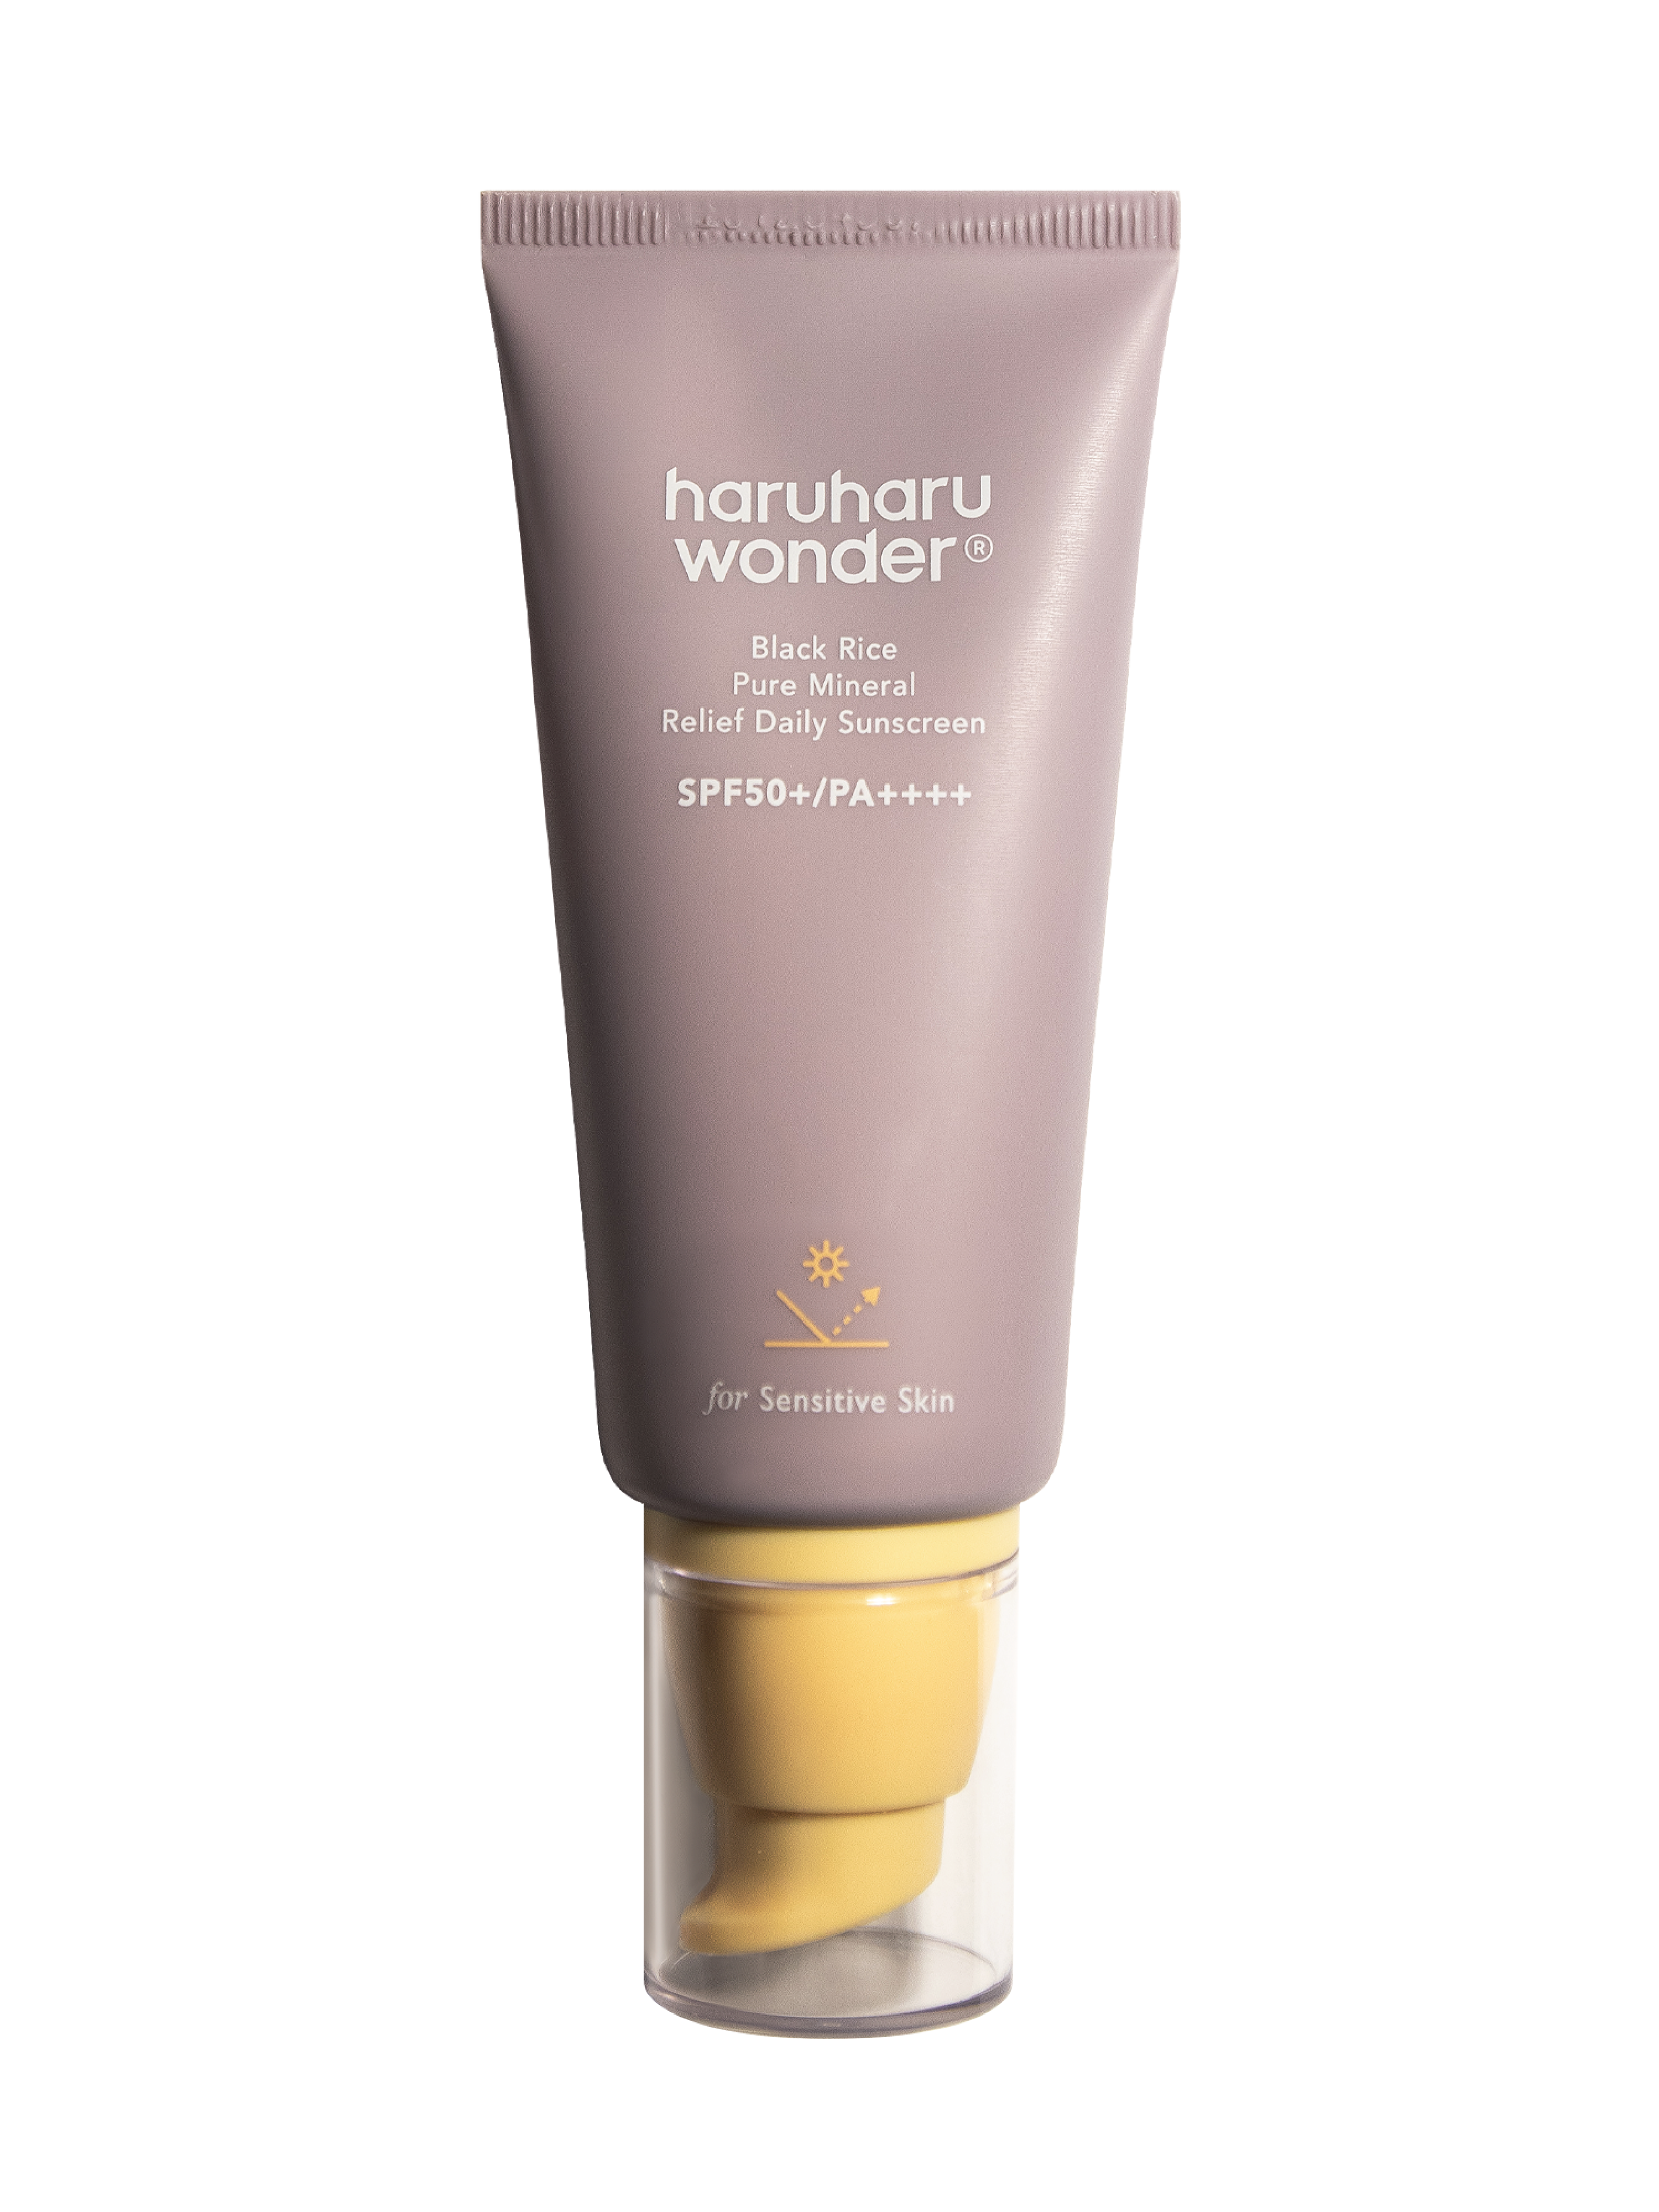 Haruharu Wonder Black Rice Pure Mineral Relief Daily Sunscreen SPF50+ PA++++, 50 ml